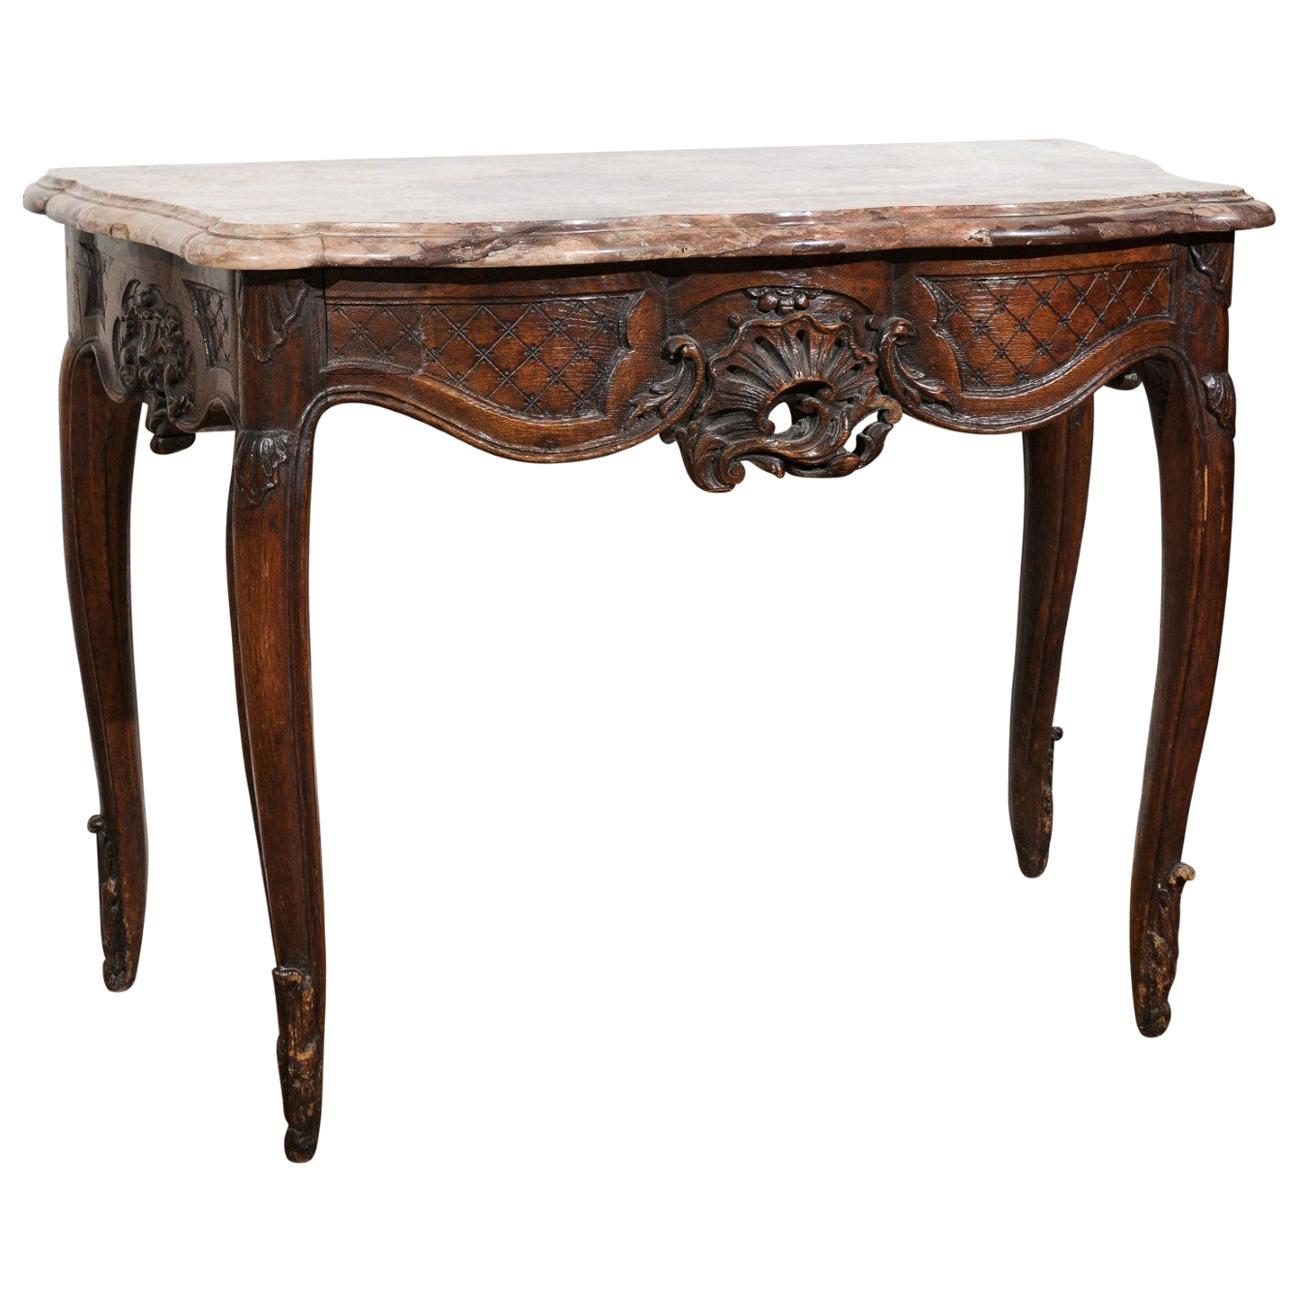 French 1720s Régence Period Walnut Console Table with Original Marble Top For Sale